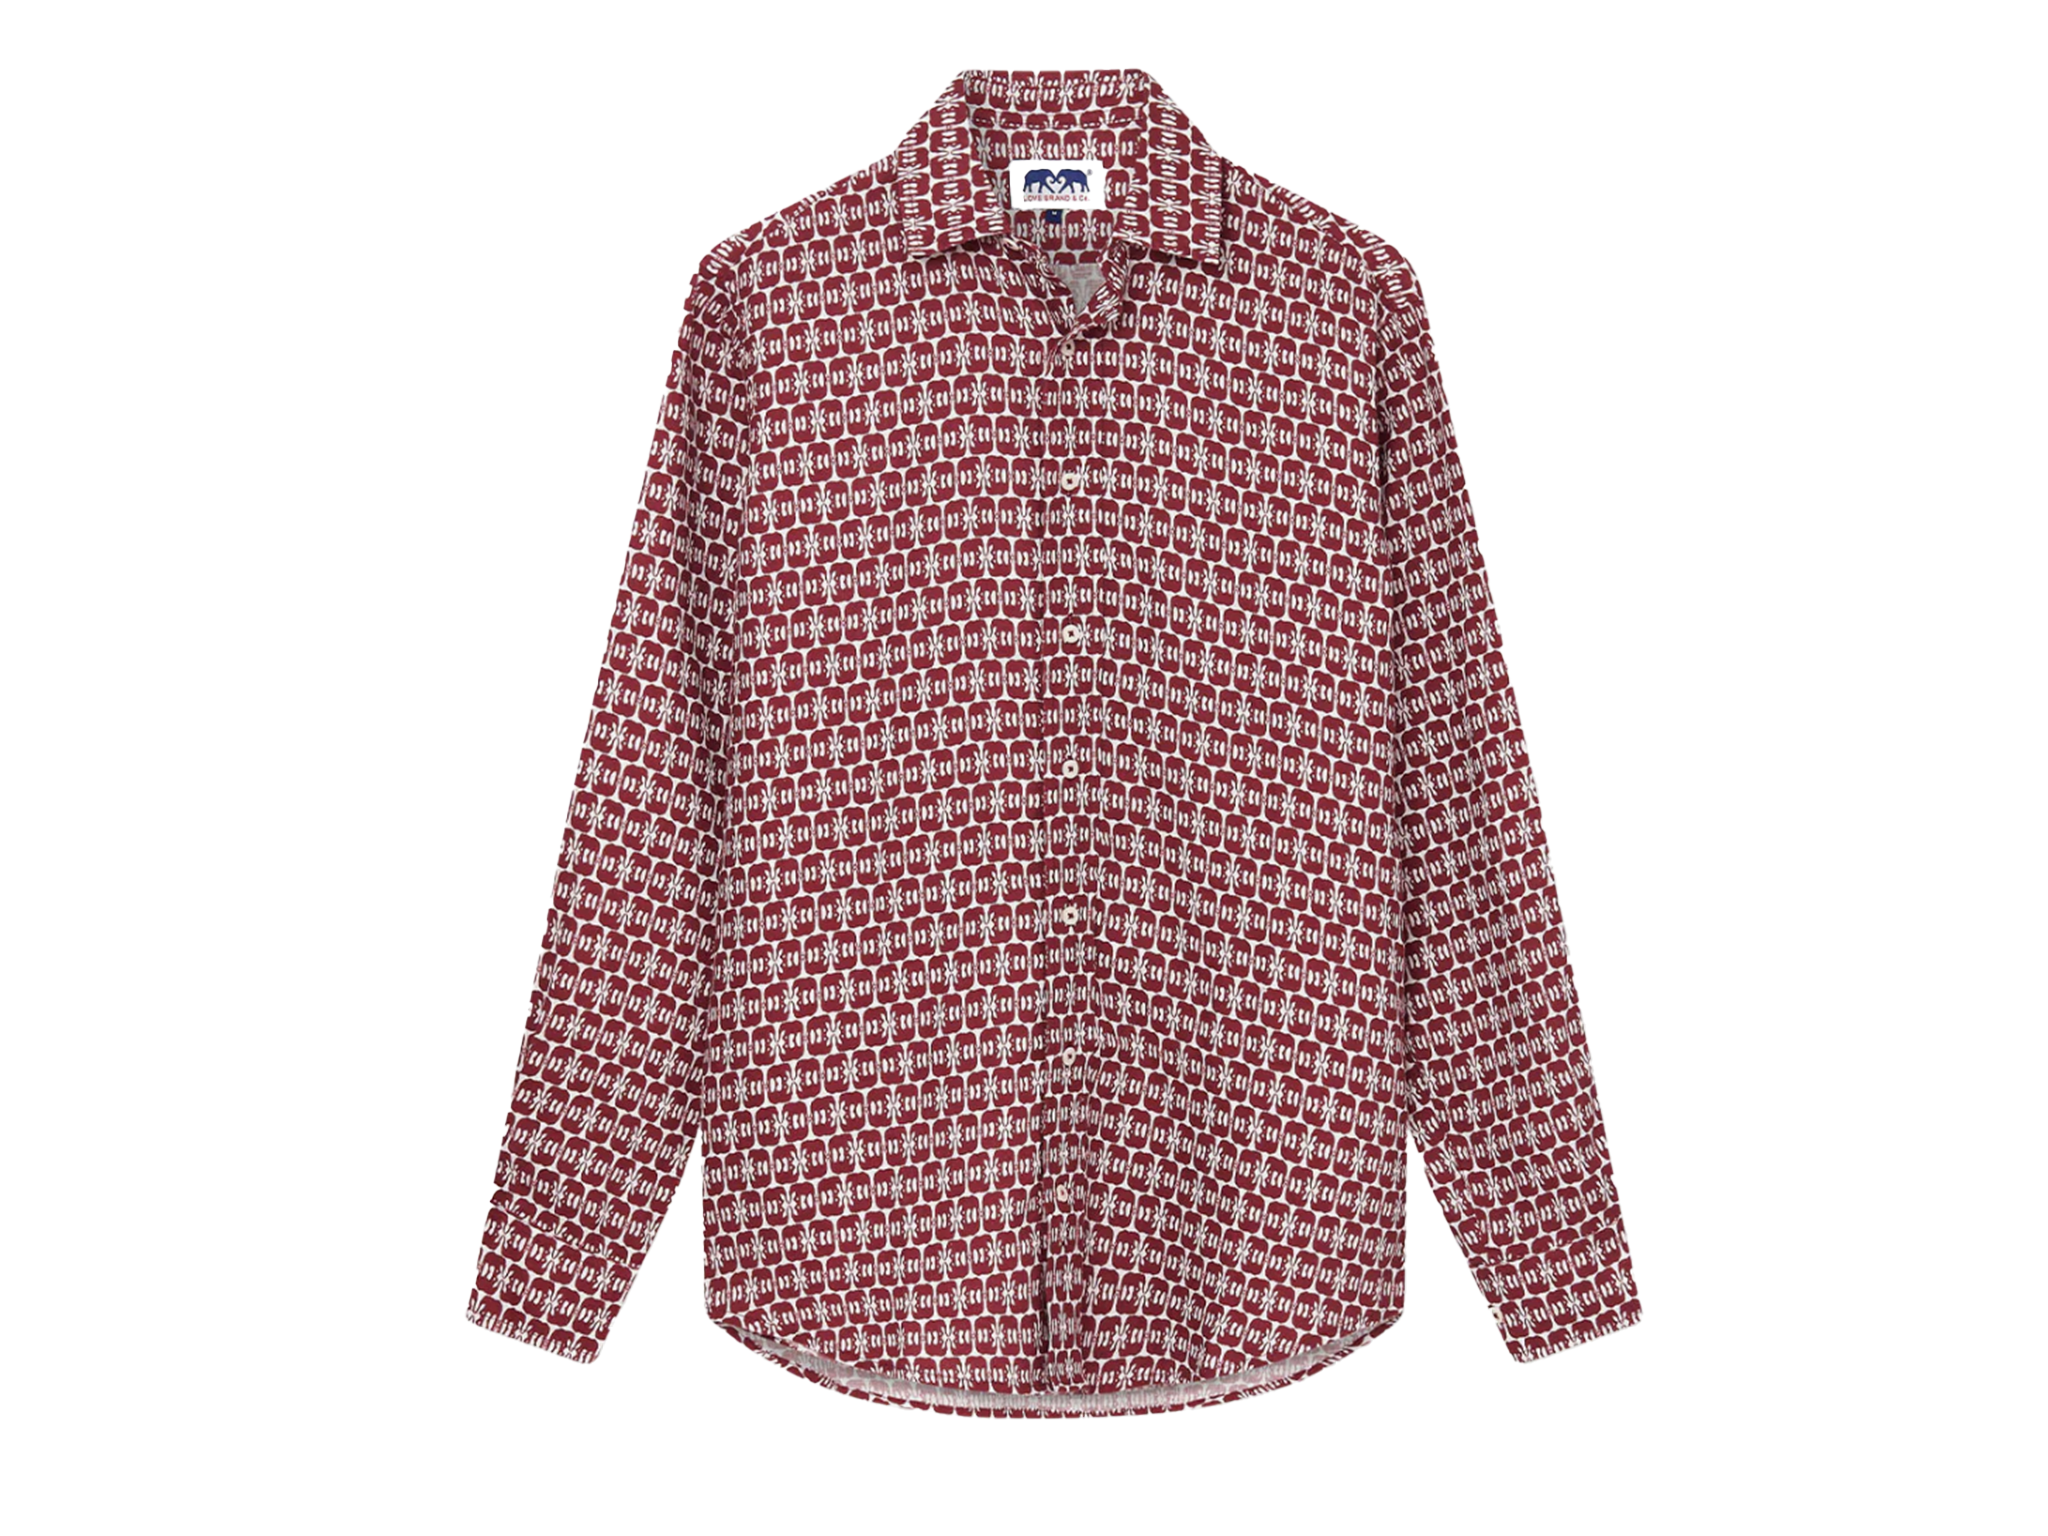 Loveandco-shirt-indybest